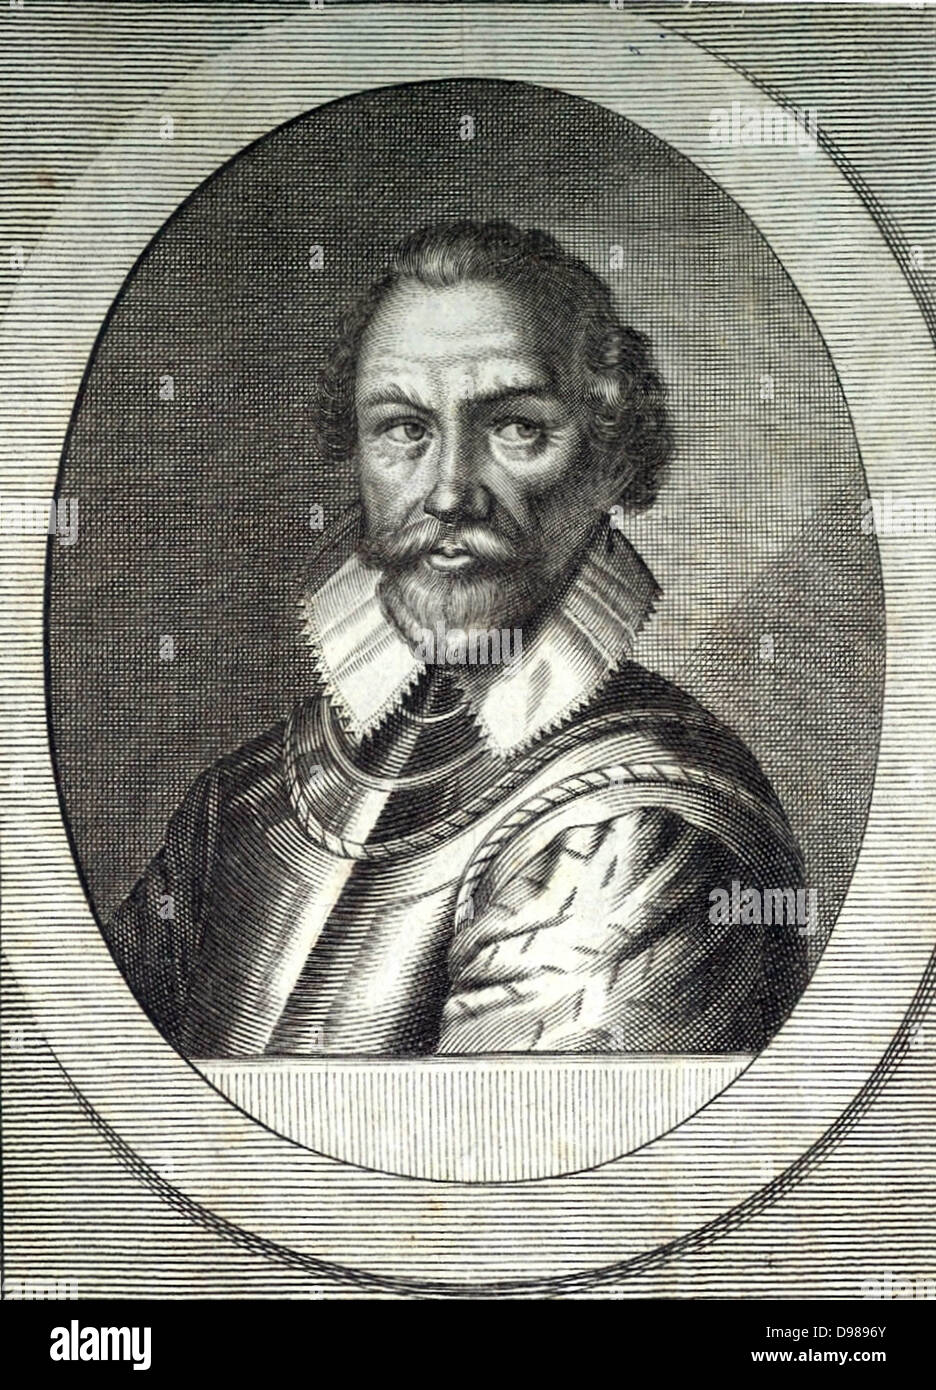 Martin Frobisher (1535-1594) English explorer and navigator. In 1576 led an expedition in search of the Northwest Passage. Engraving by Michiel van der Gucht (1660-1725) for Clarendon's 'History'. Stock Photo